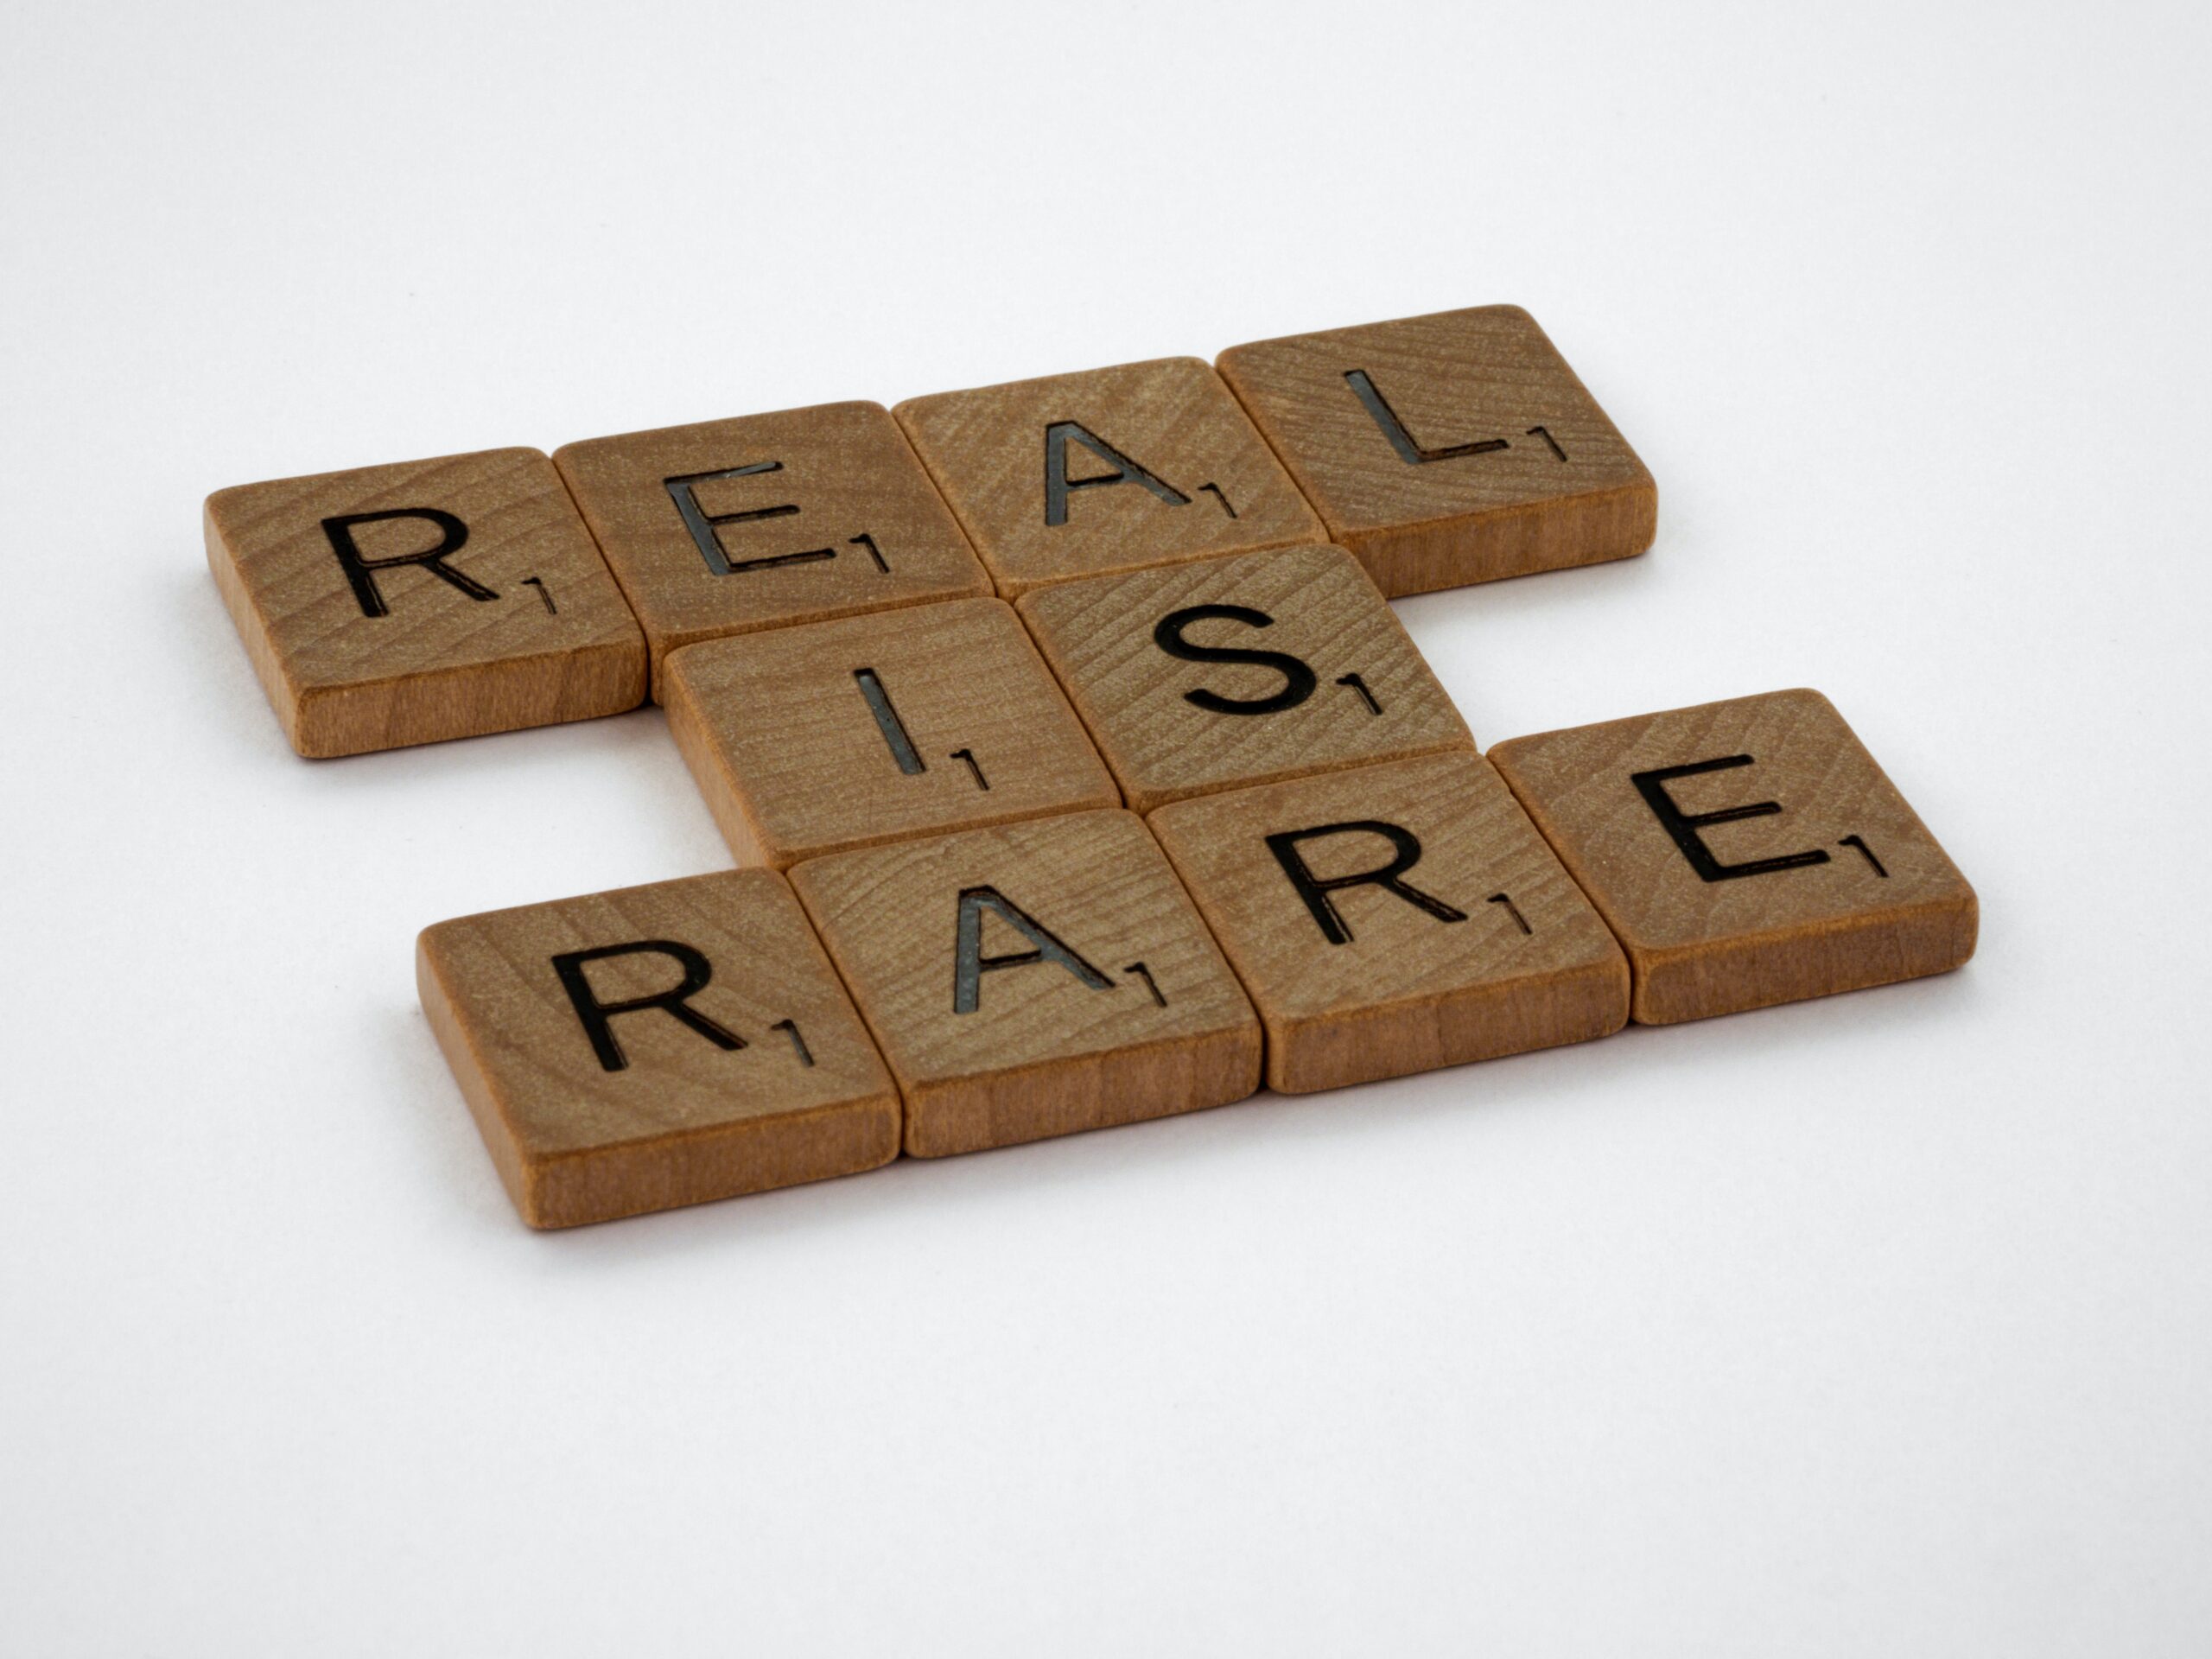 Scrabble tiles spells out "real is rare"